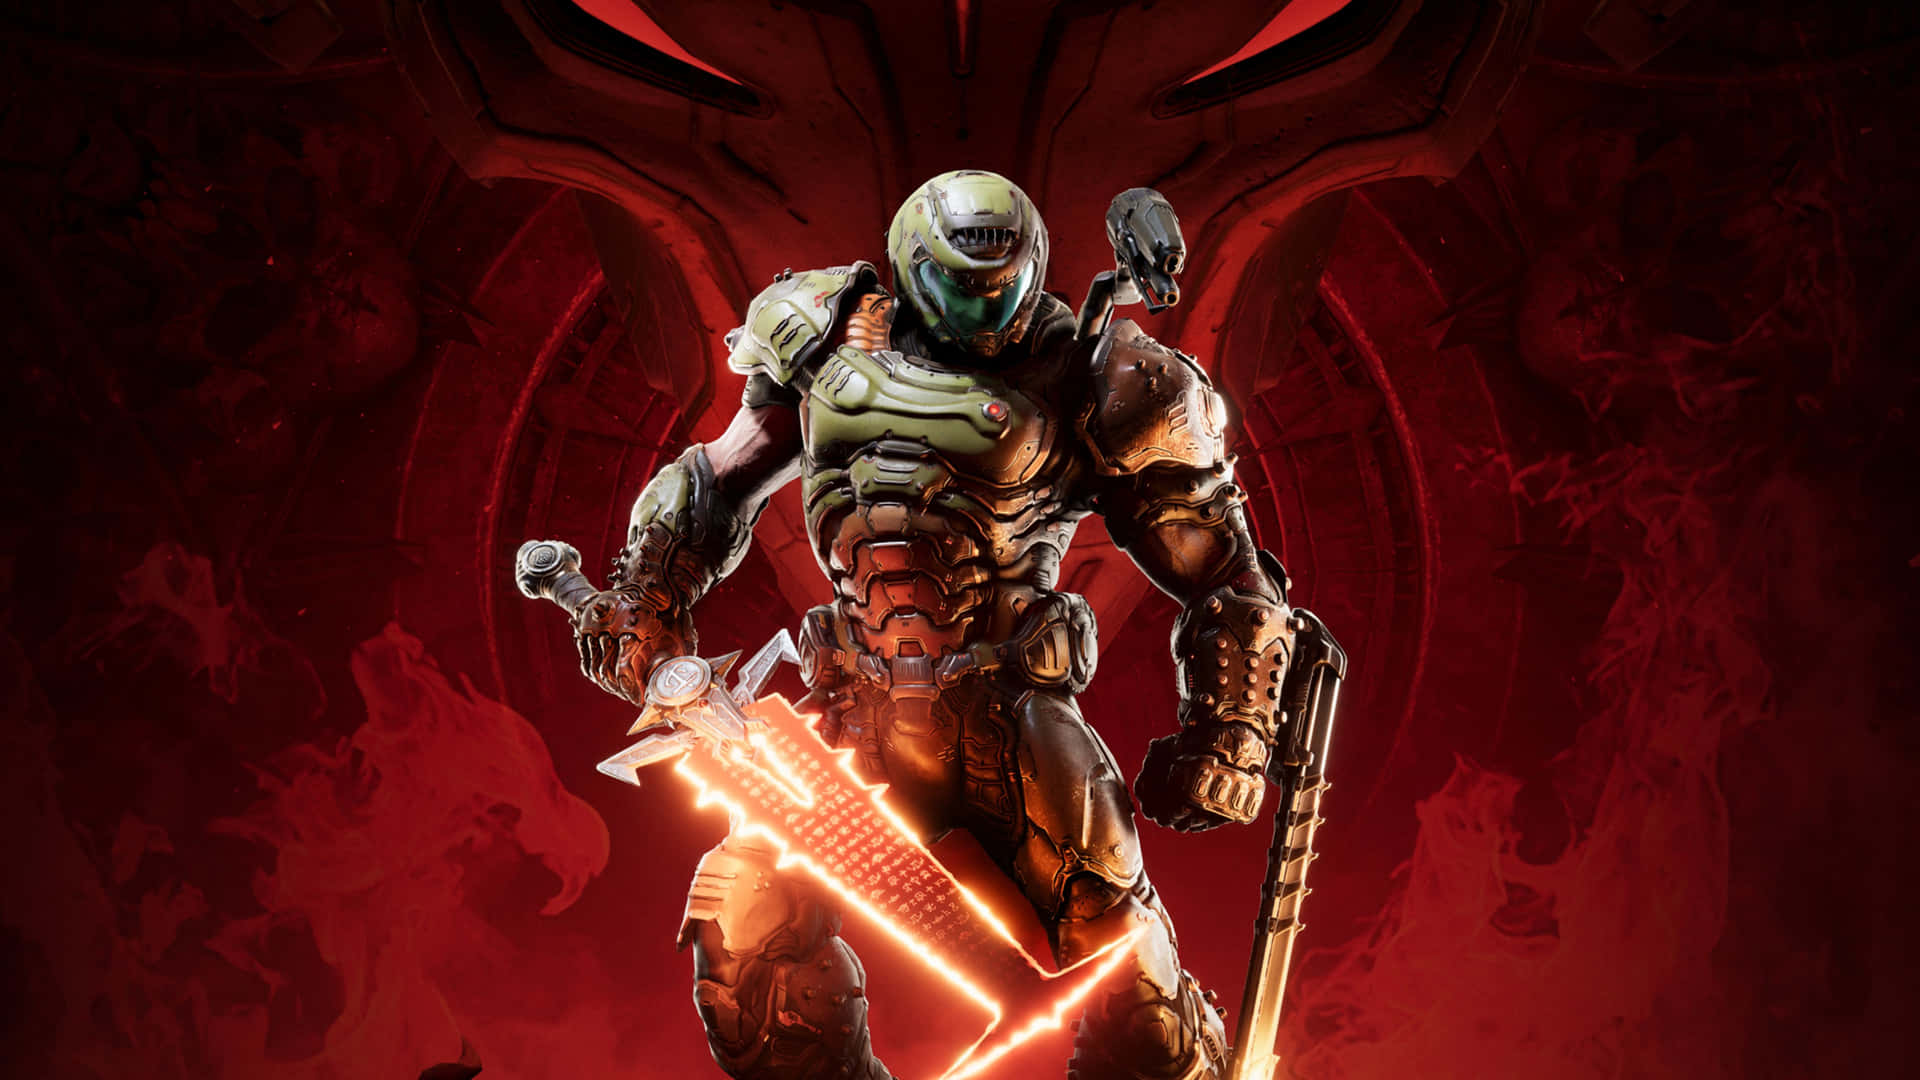 Doom - A Character With A Sword And A Red Light Wallpaper